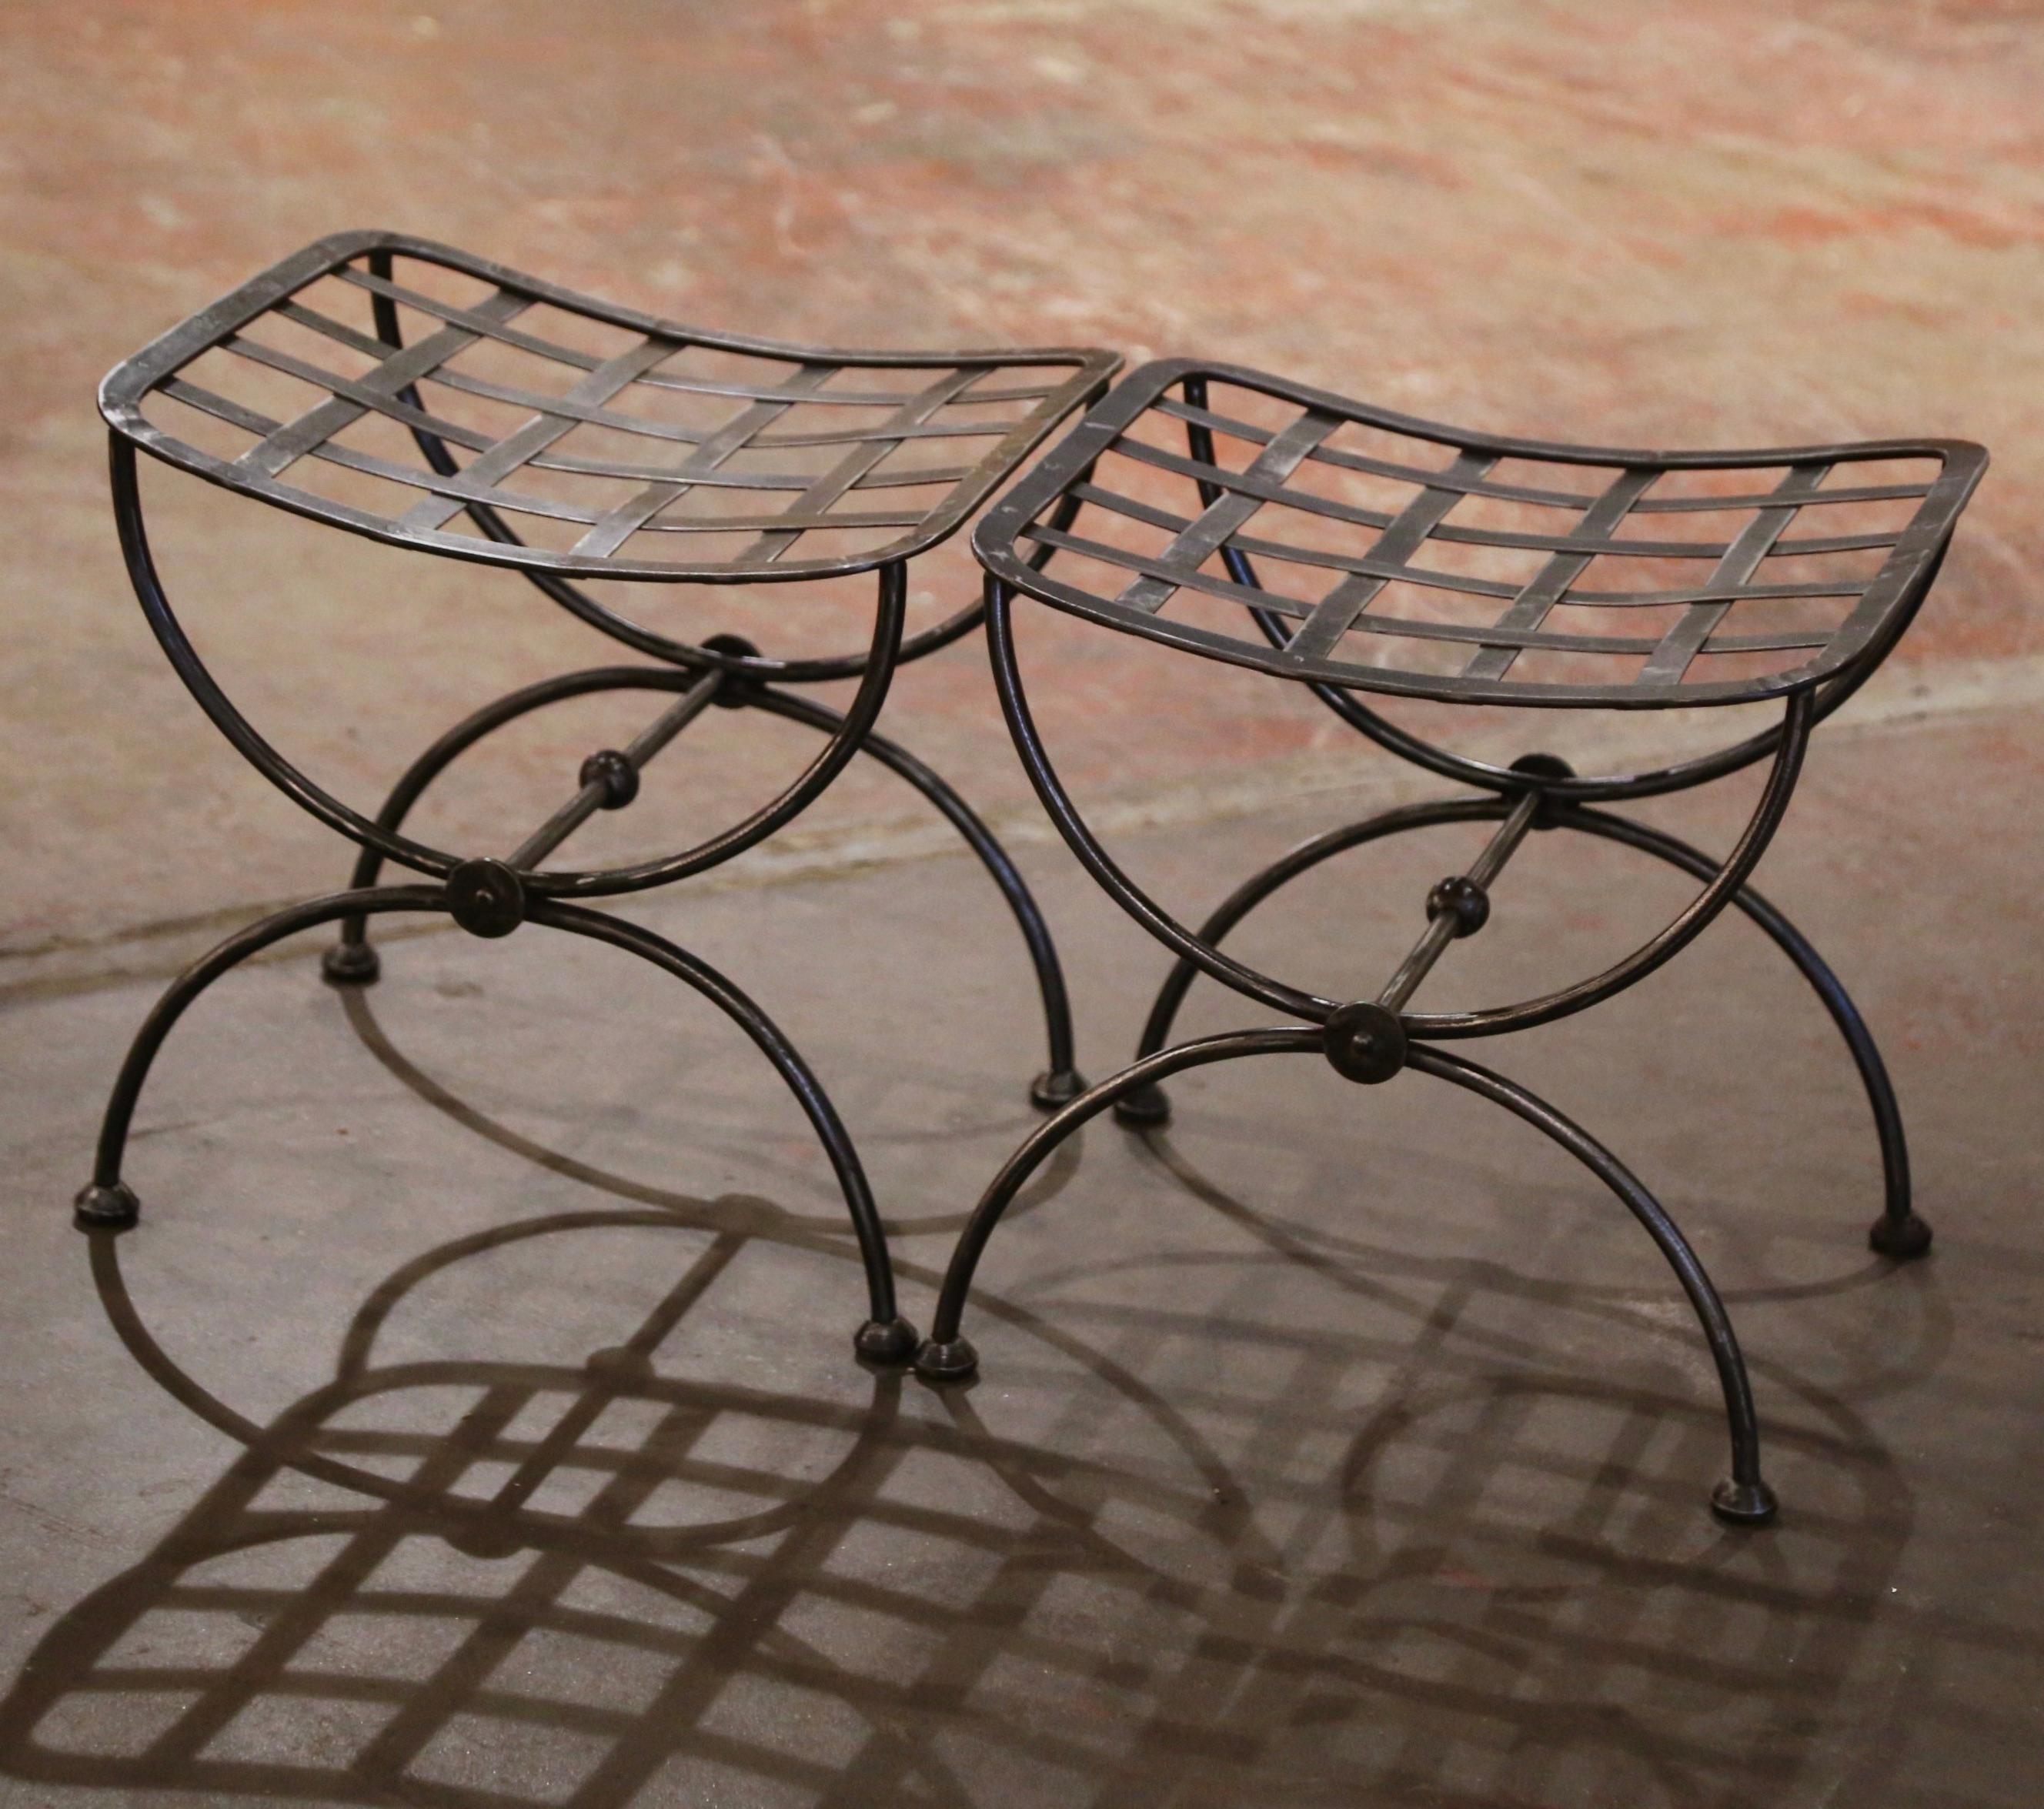 Crafted in France circa 1960 and made of wrought iron, each antique stool stands on forged Dagobert legs ending with round feet, and connected with a decorative bottom stretcher. The curved comfortable seat has an intricate weave decor throughout.